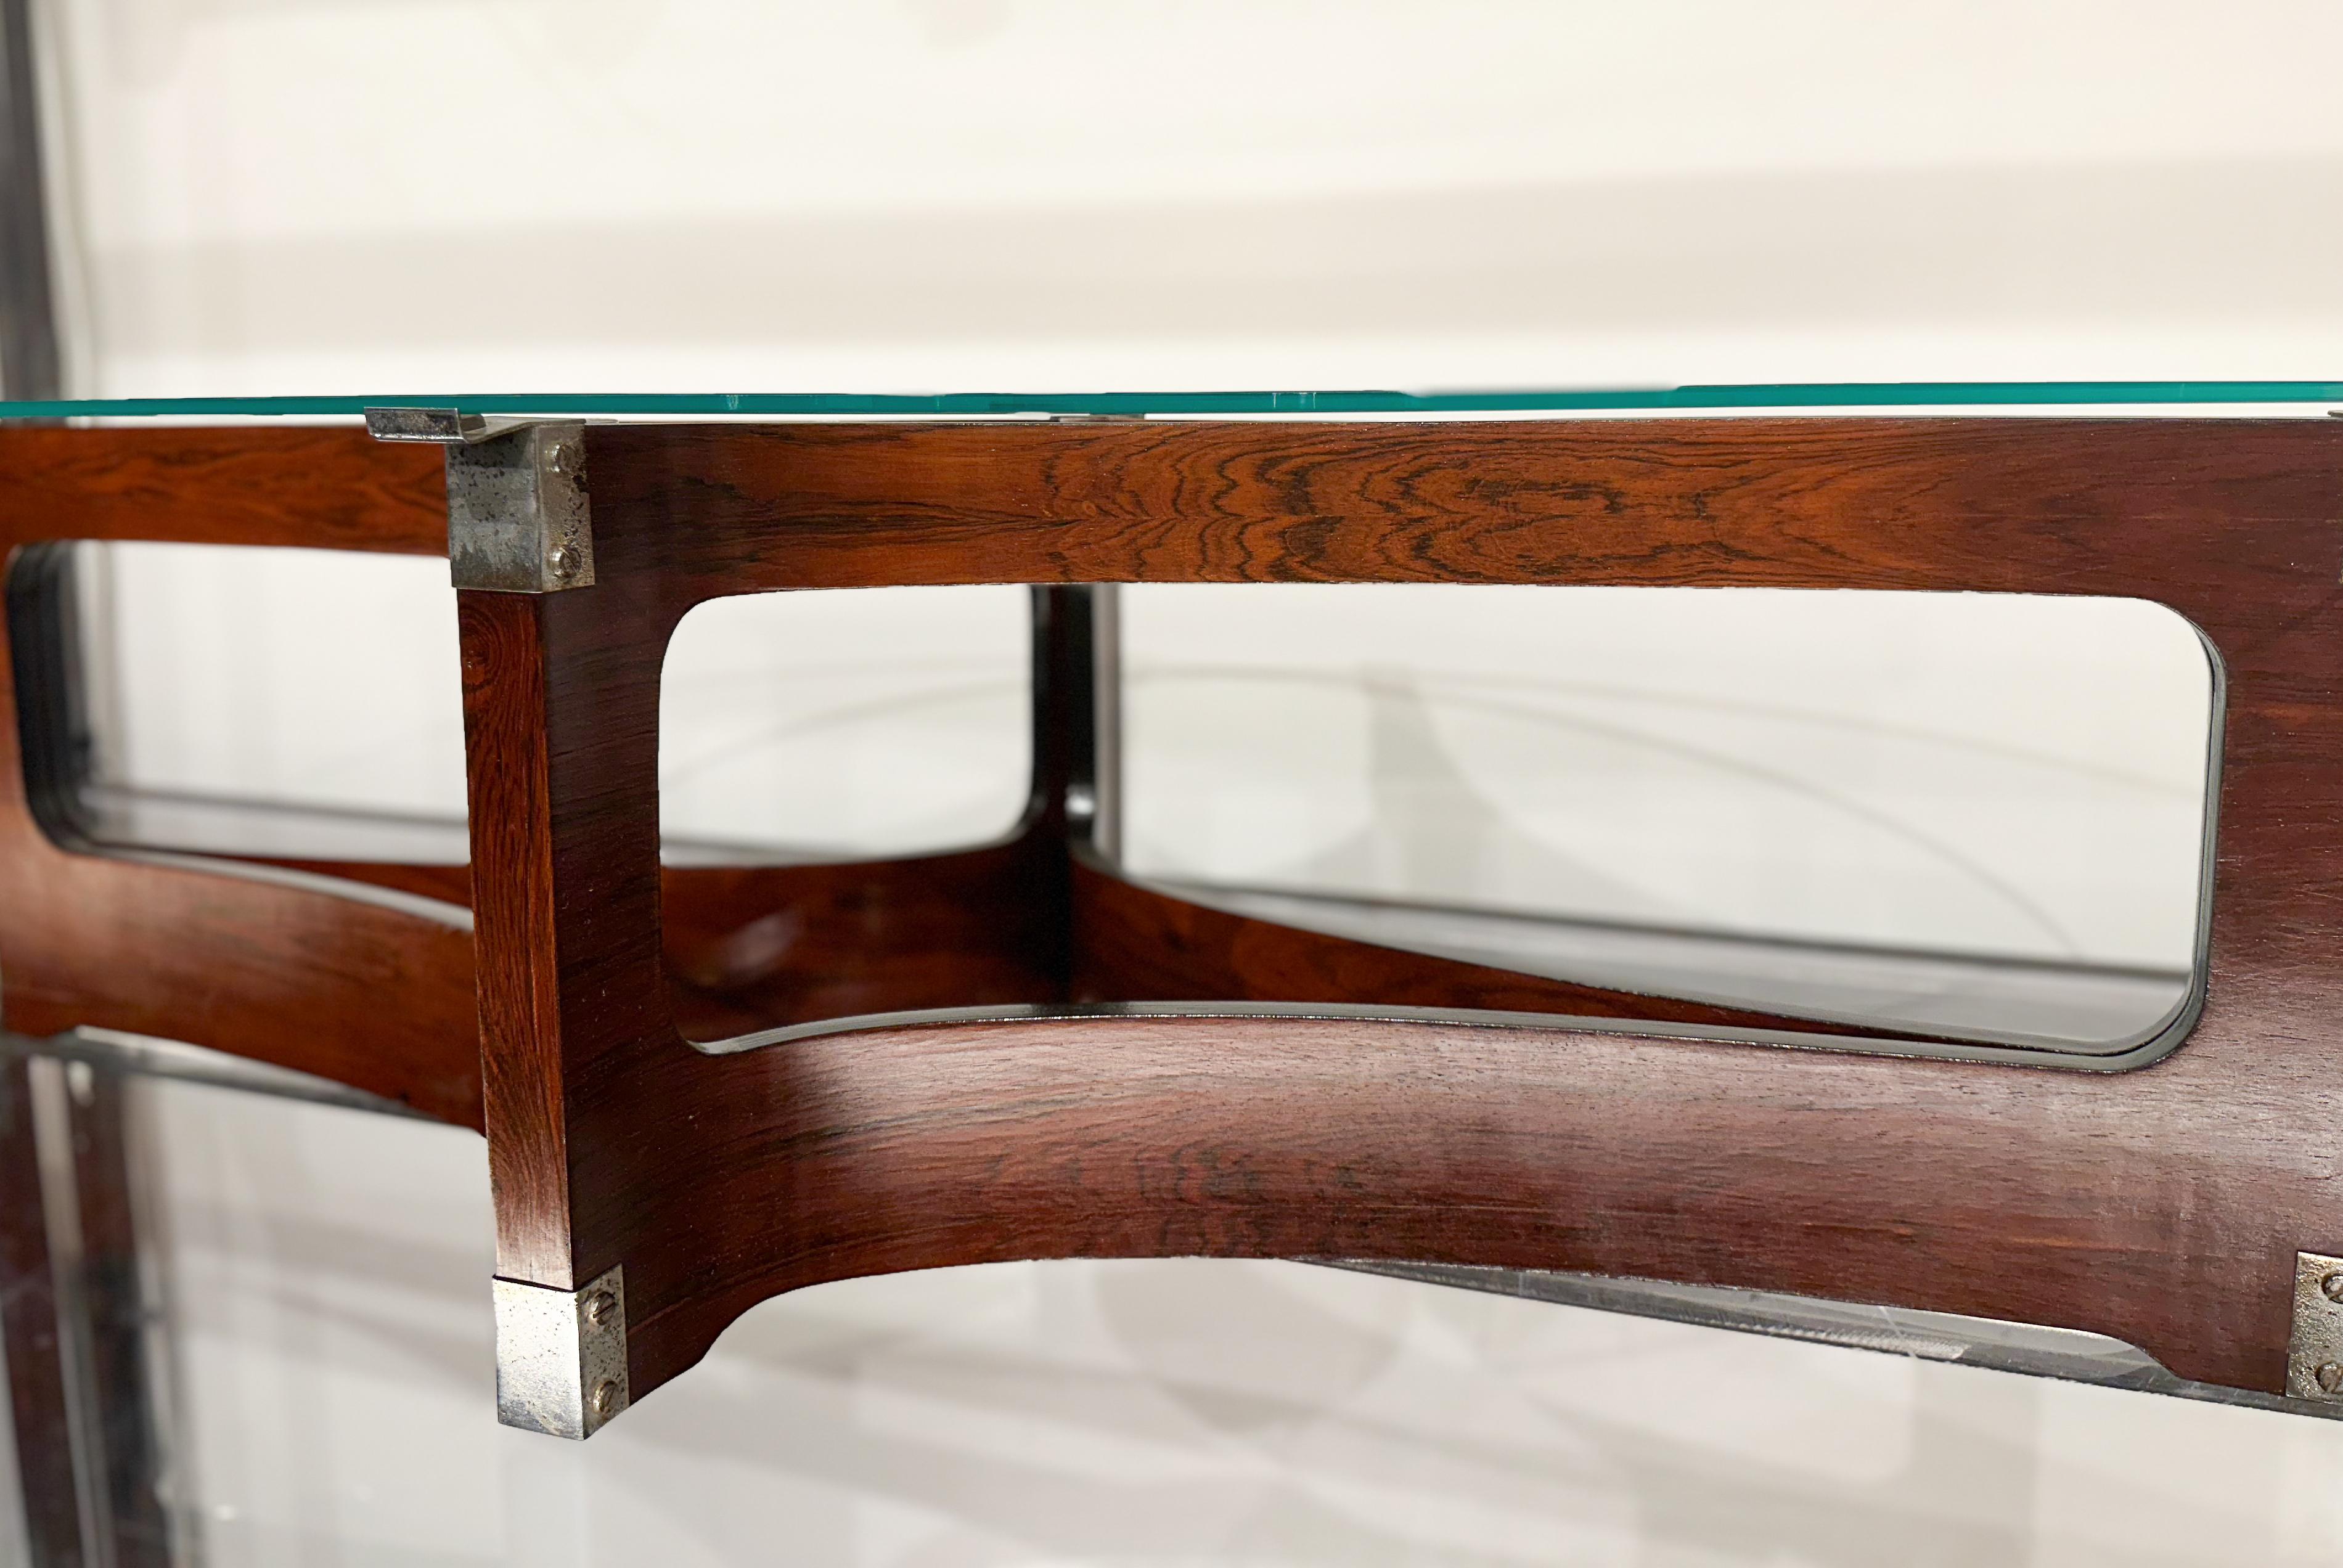 Brazilian Modern Coffee Table in Bent Wood & Glass, Novo Rumo, Brazil, c. 1960s In Good Condition For Sale In New York, NY